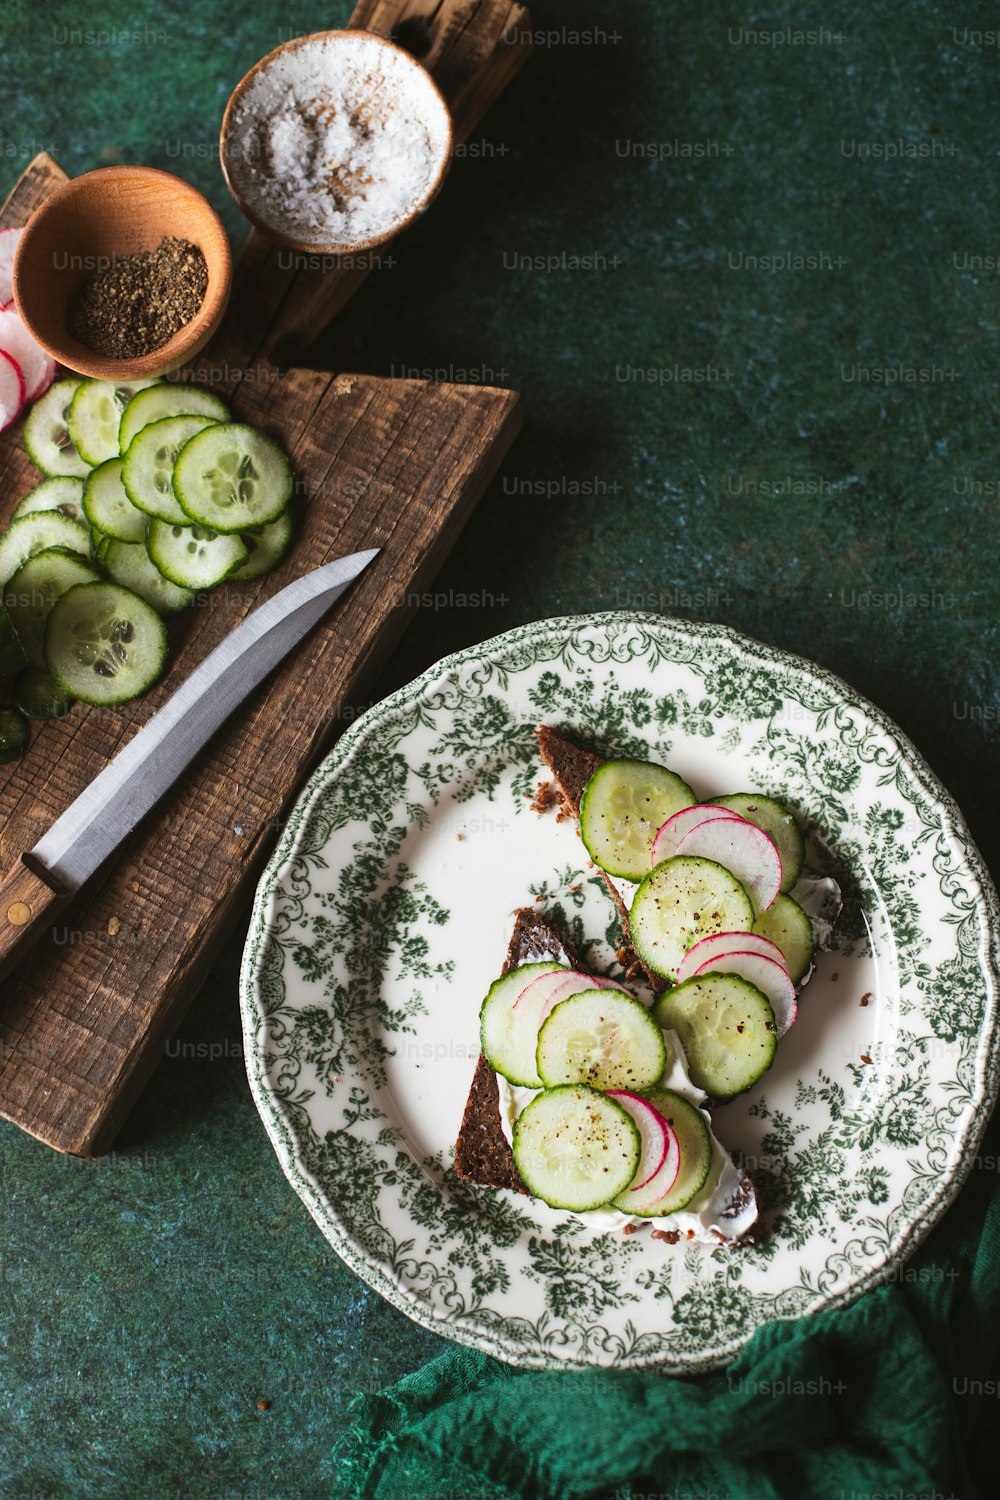 a plate of food with cucumbers and radishes on it